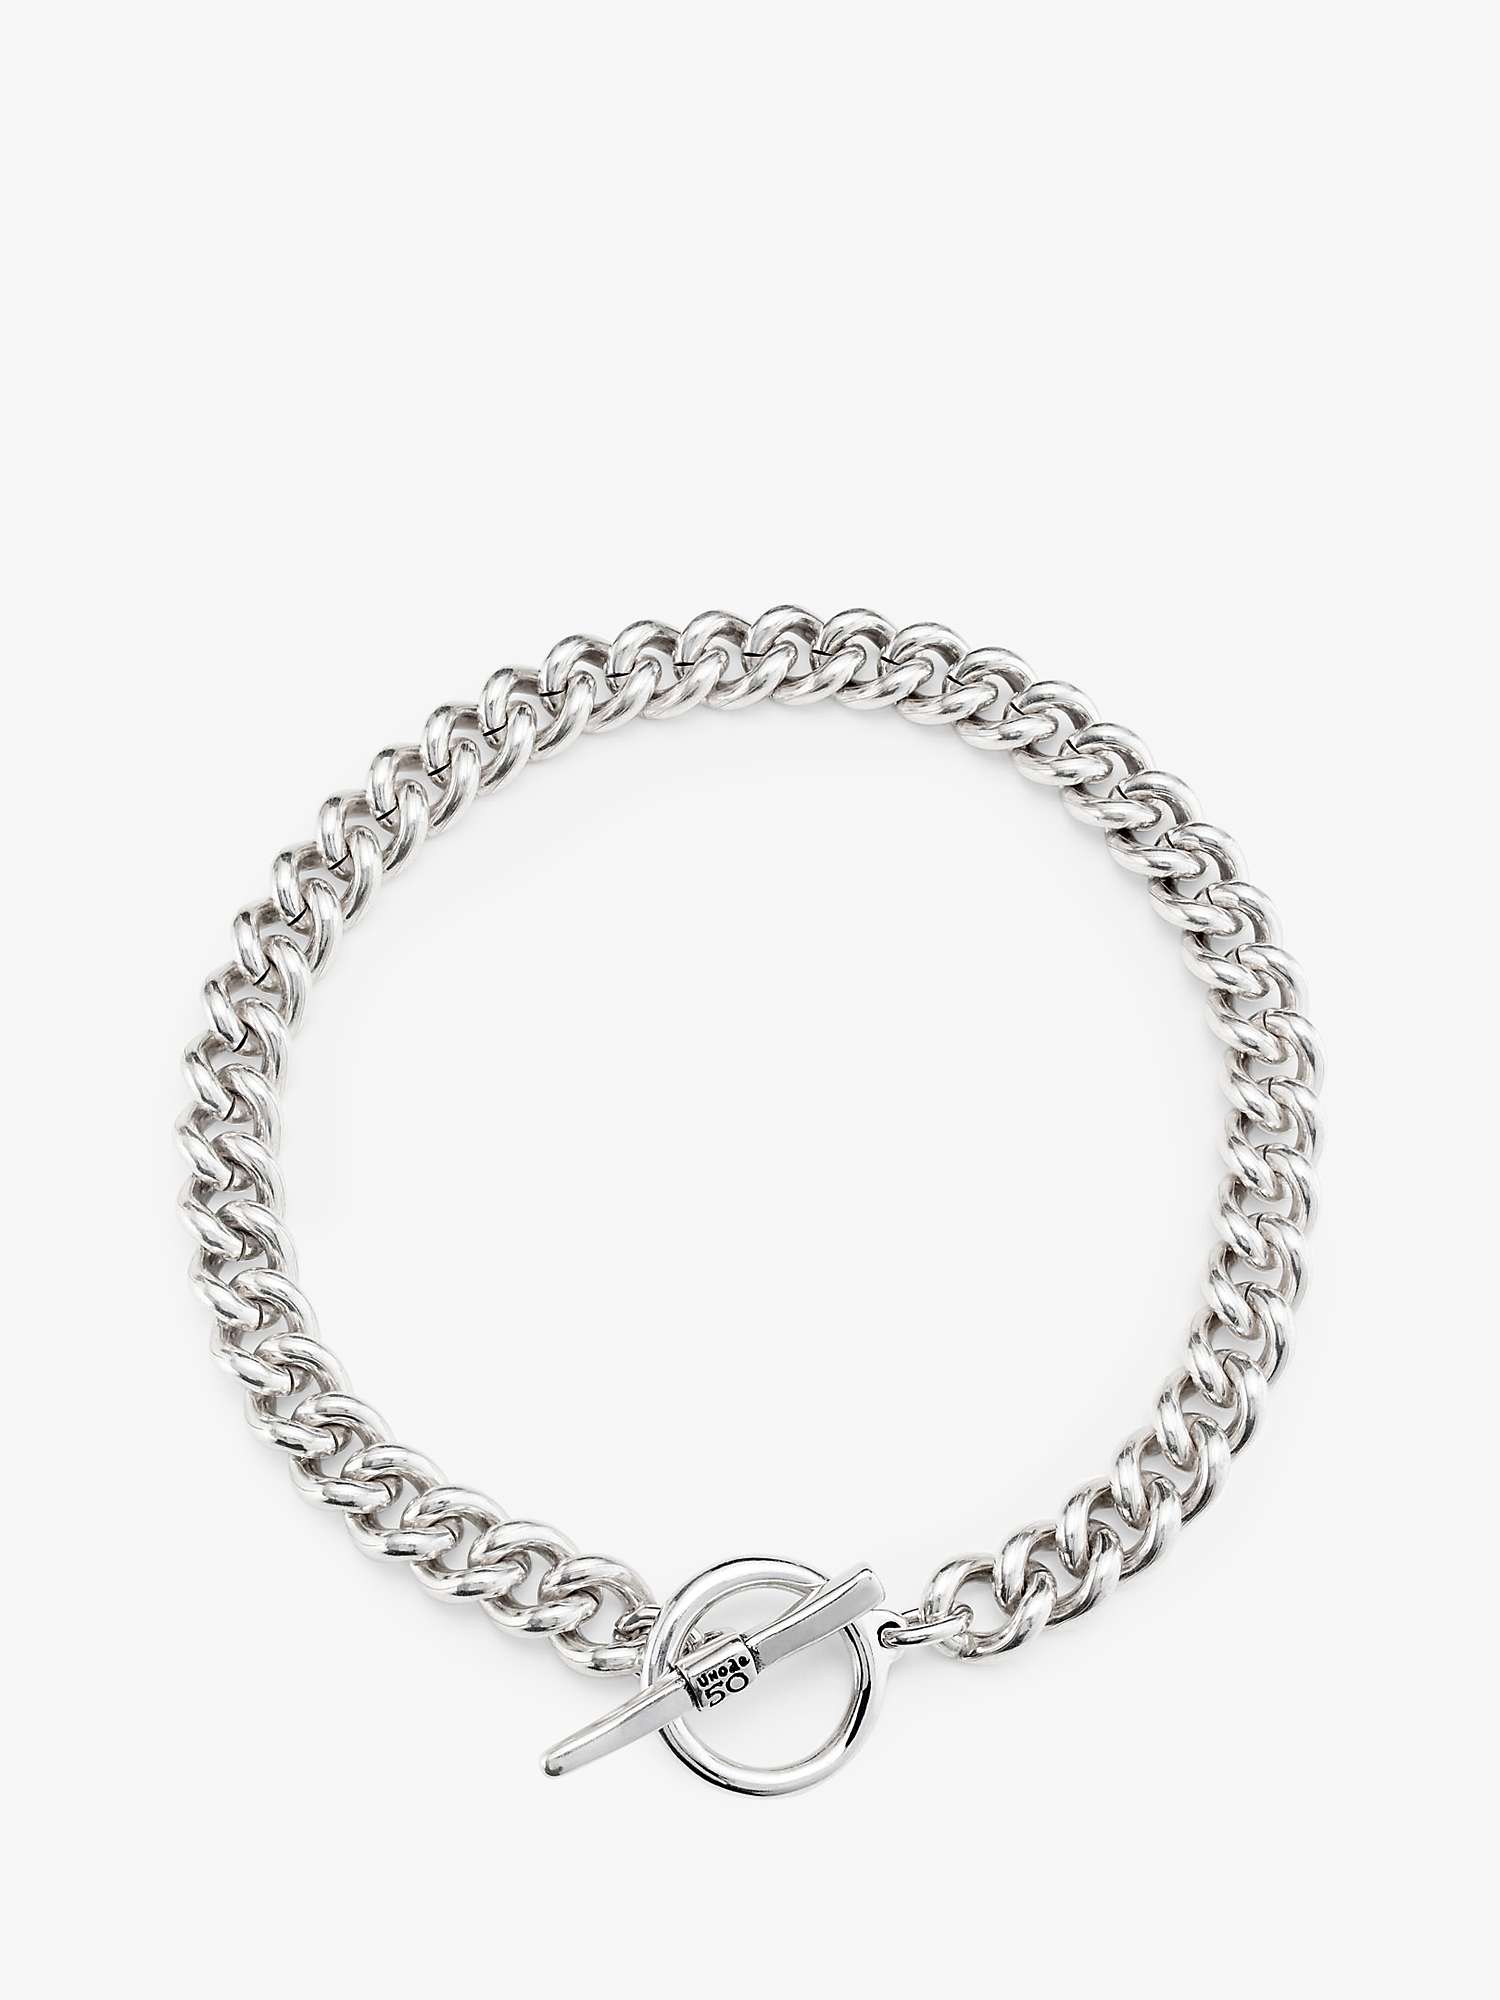 Buy UNOde50 Electric Bearded Chain T-Bar Necklace, Silver Online at johnlewis.com